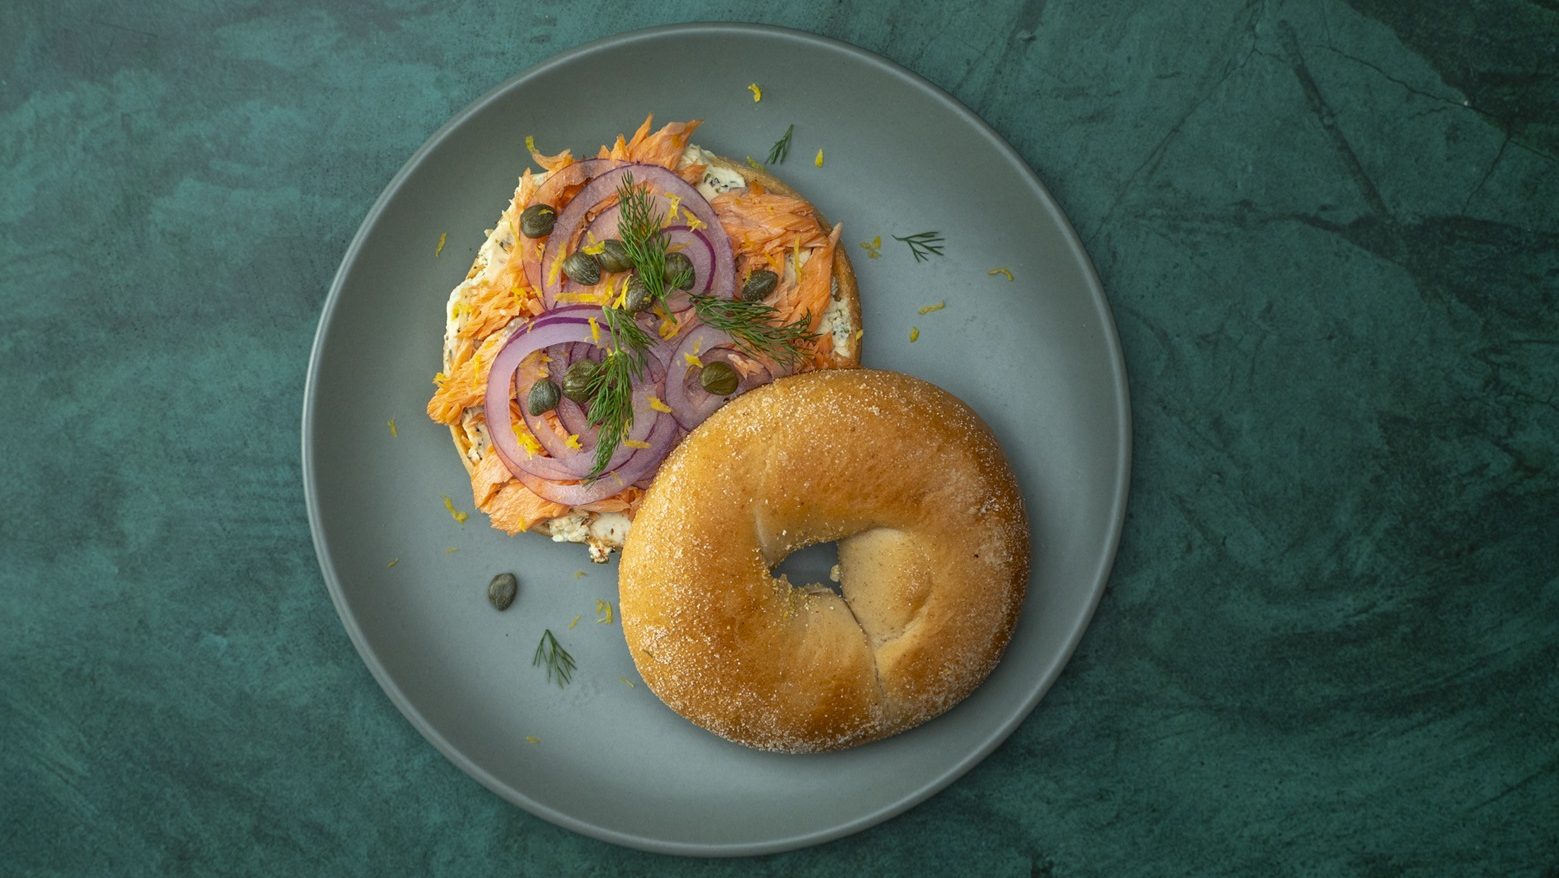 Bagel with salmon flake, sliced red onion, herb and capers on green plate.